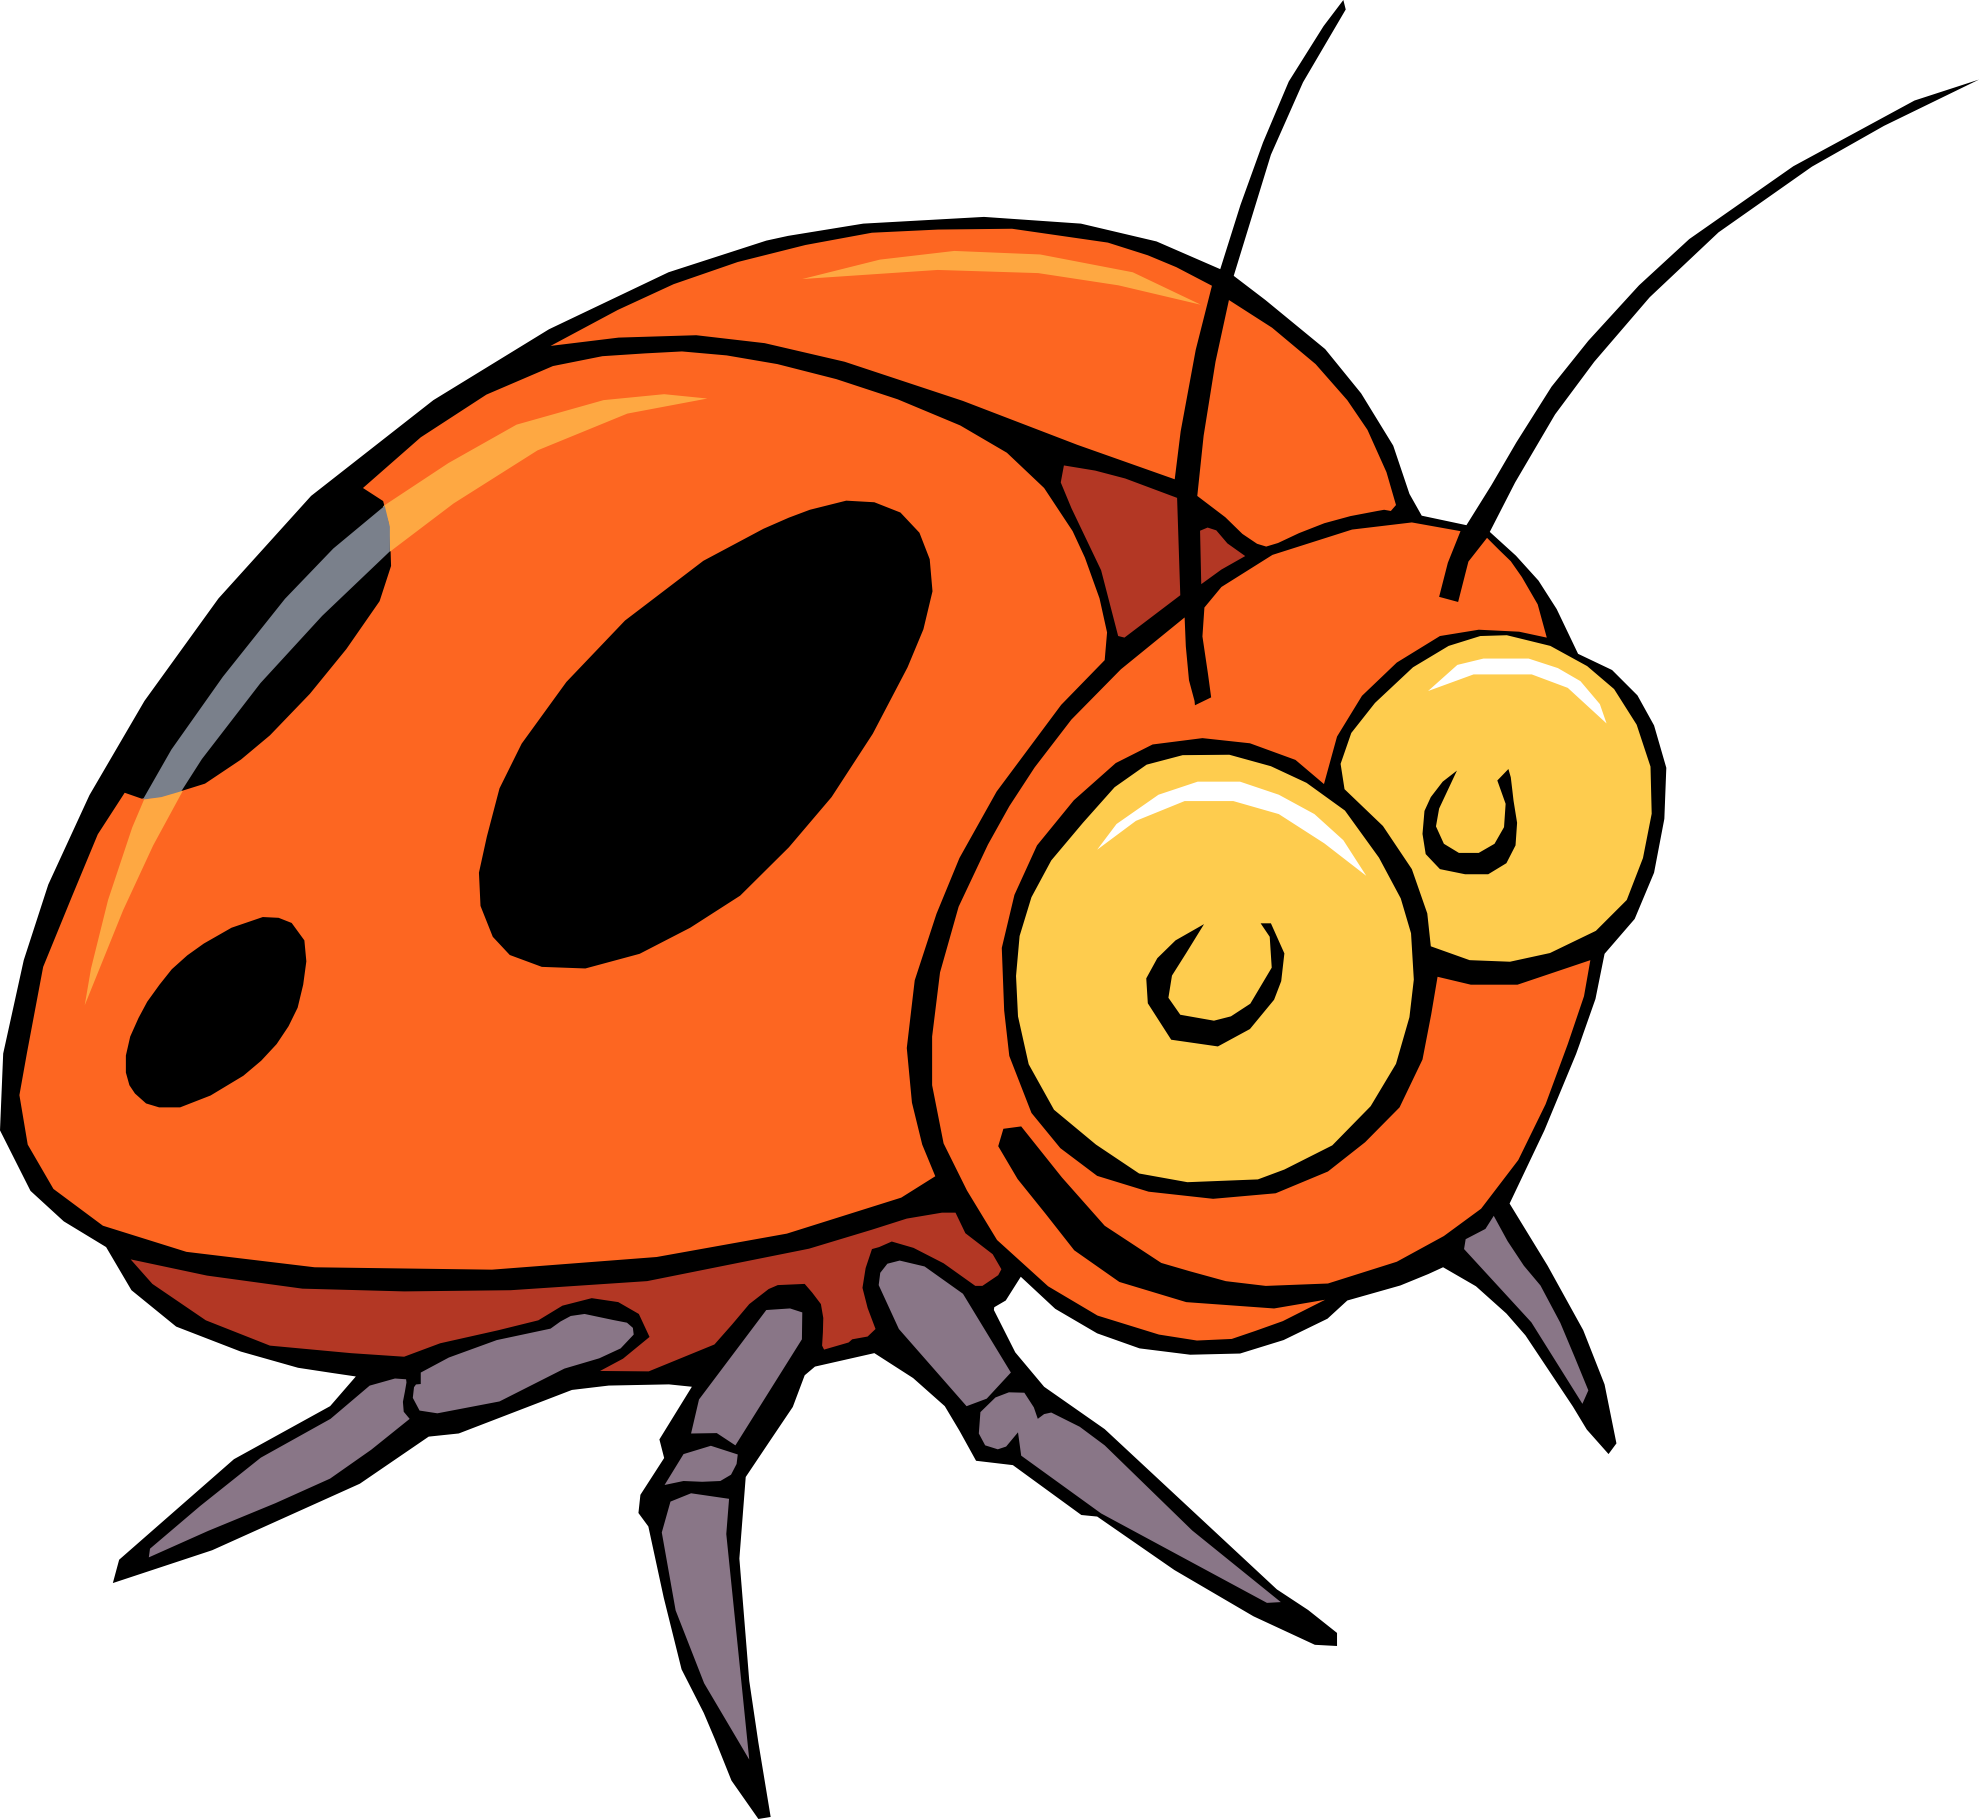 Bug insect clip art free clipart image